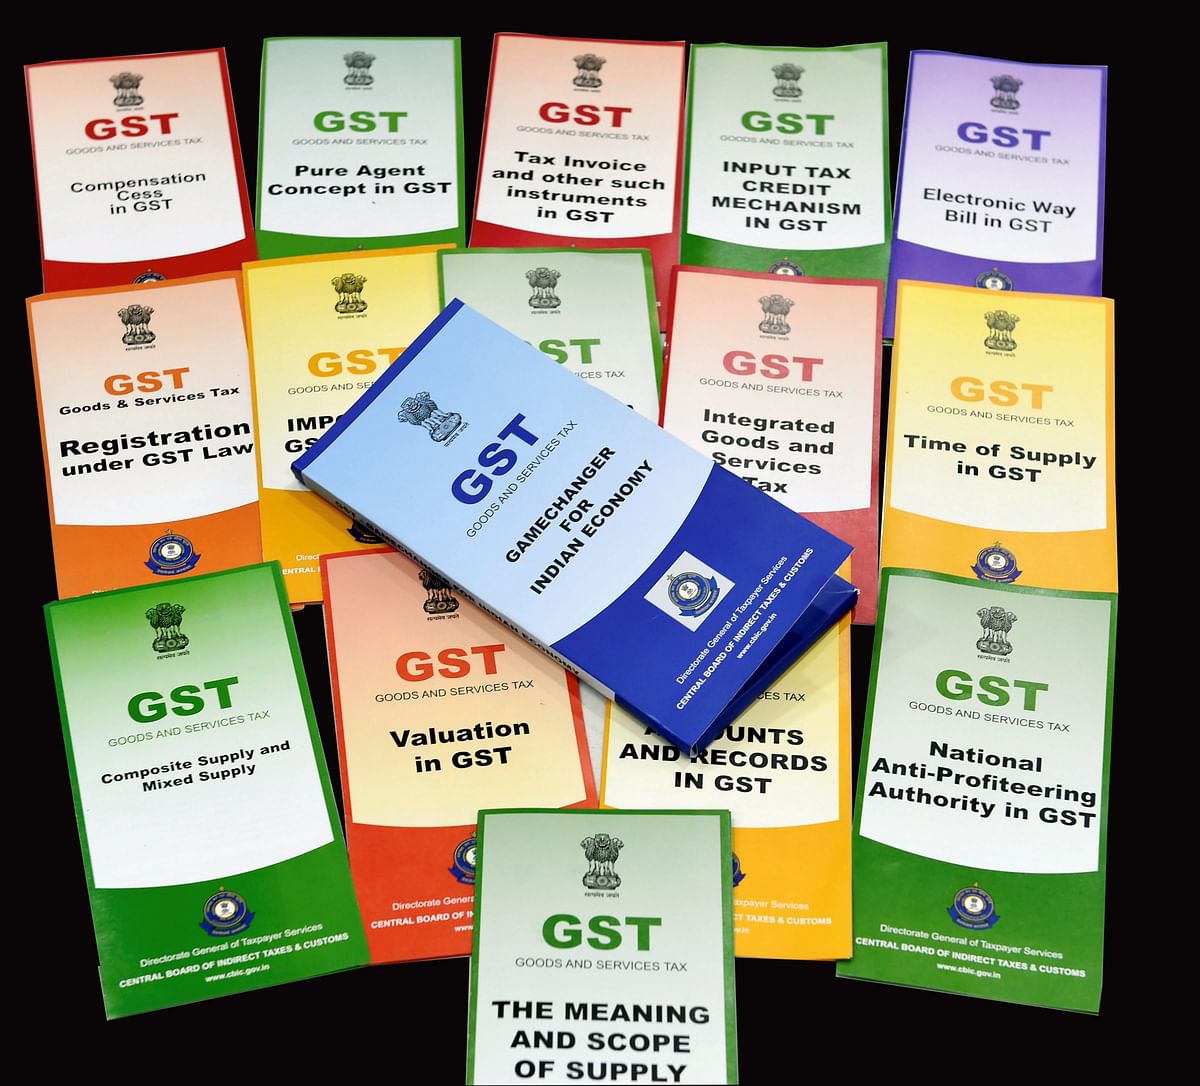 Now 22 lakh 'Nil' GST filers can file monthly returns via SMS